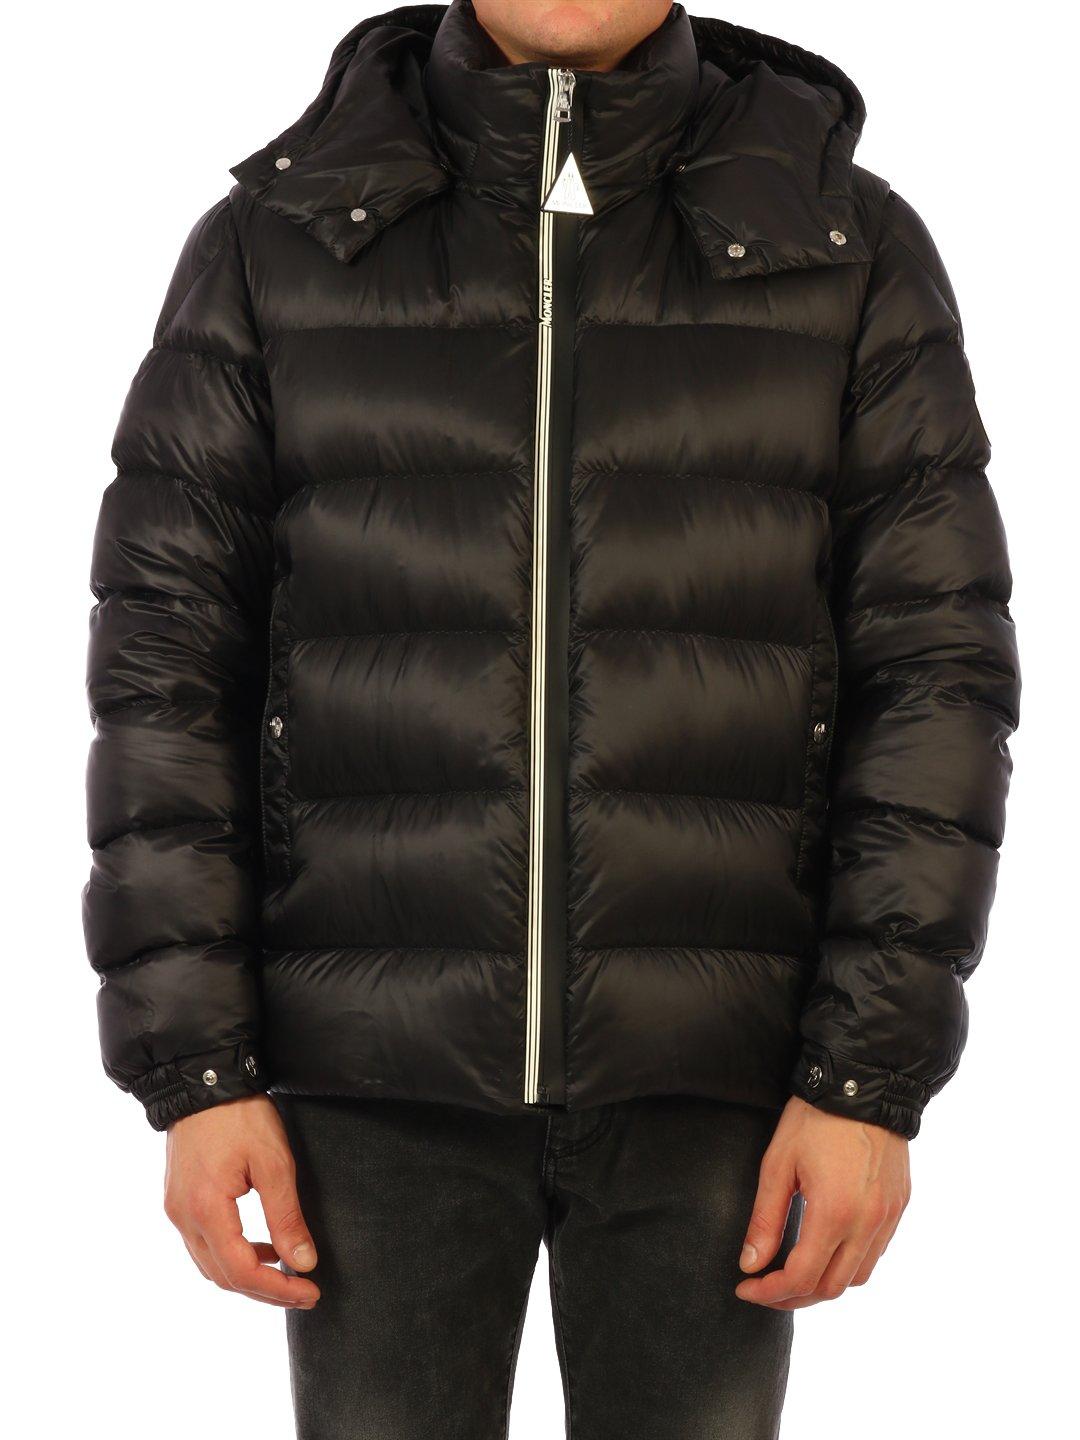 Moncler Synthetic Arves Hooded Down Jacket in Black for Men - Lyst